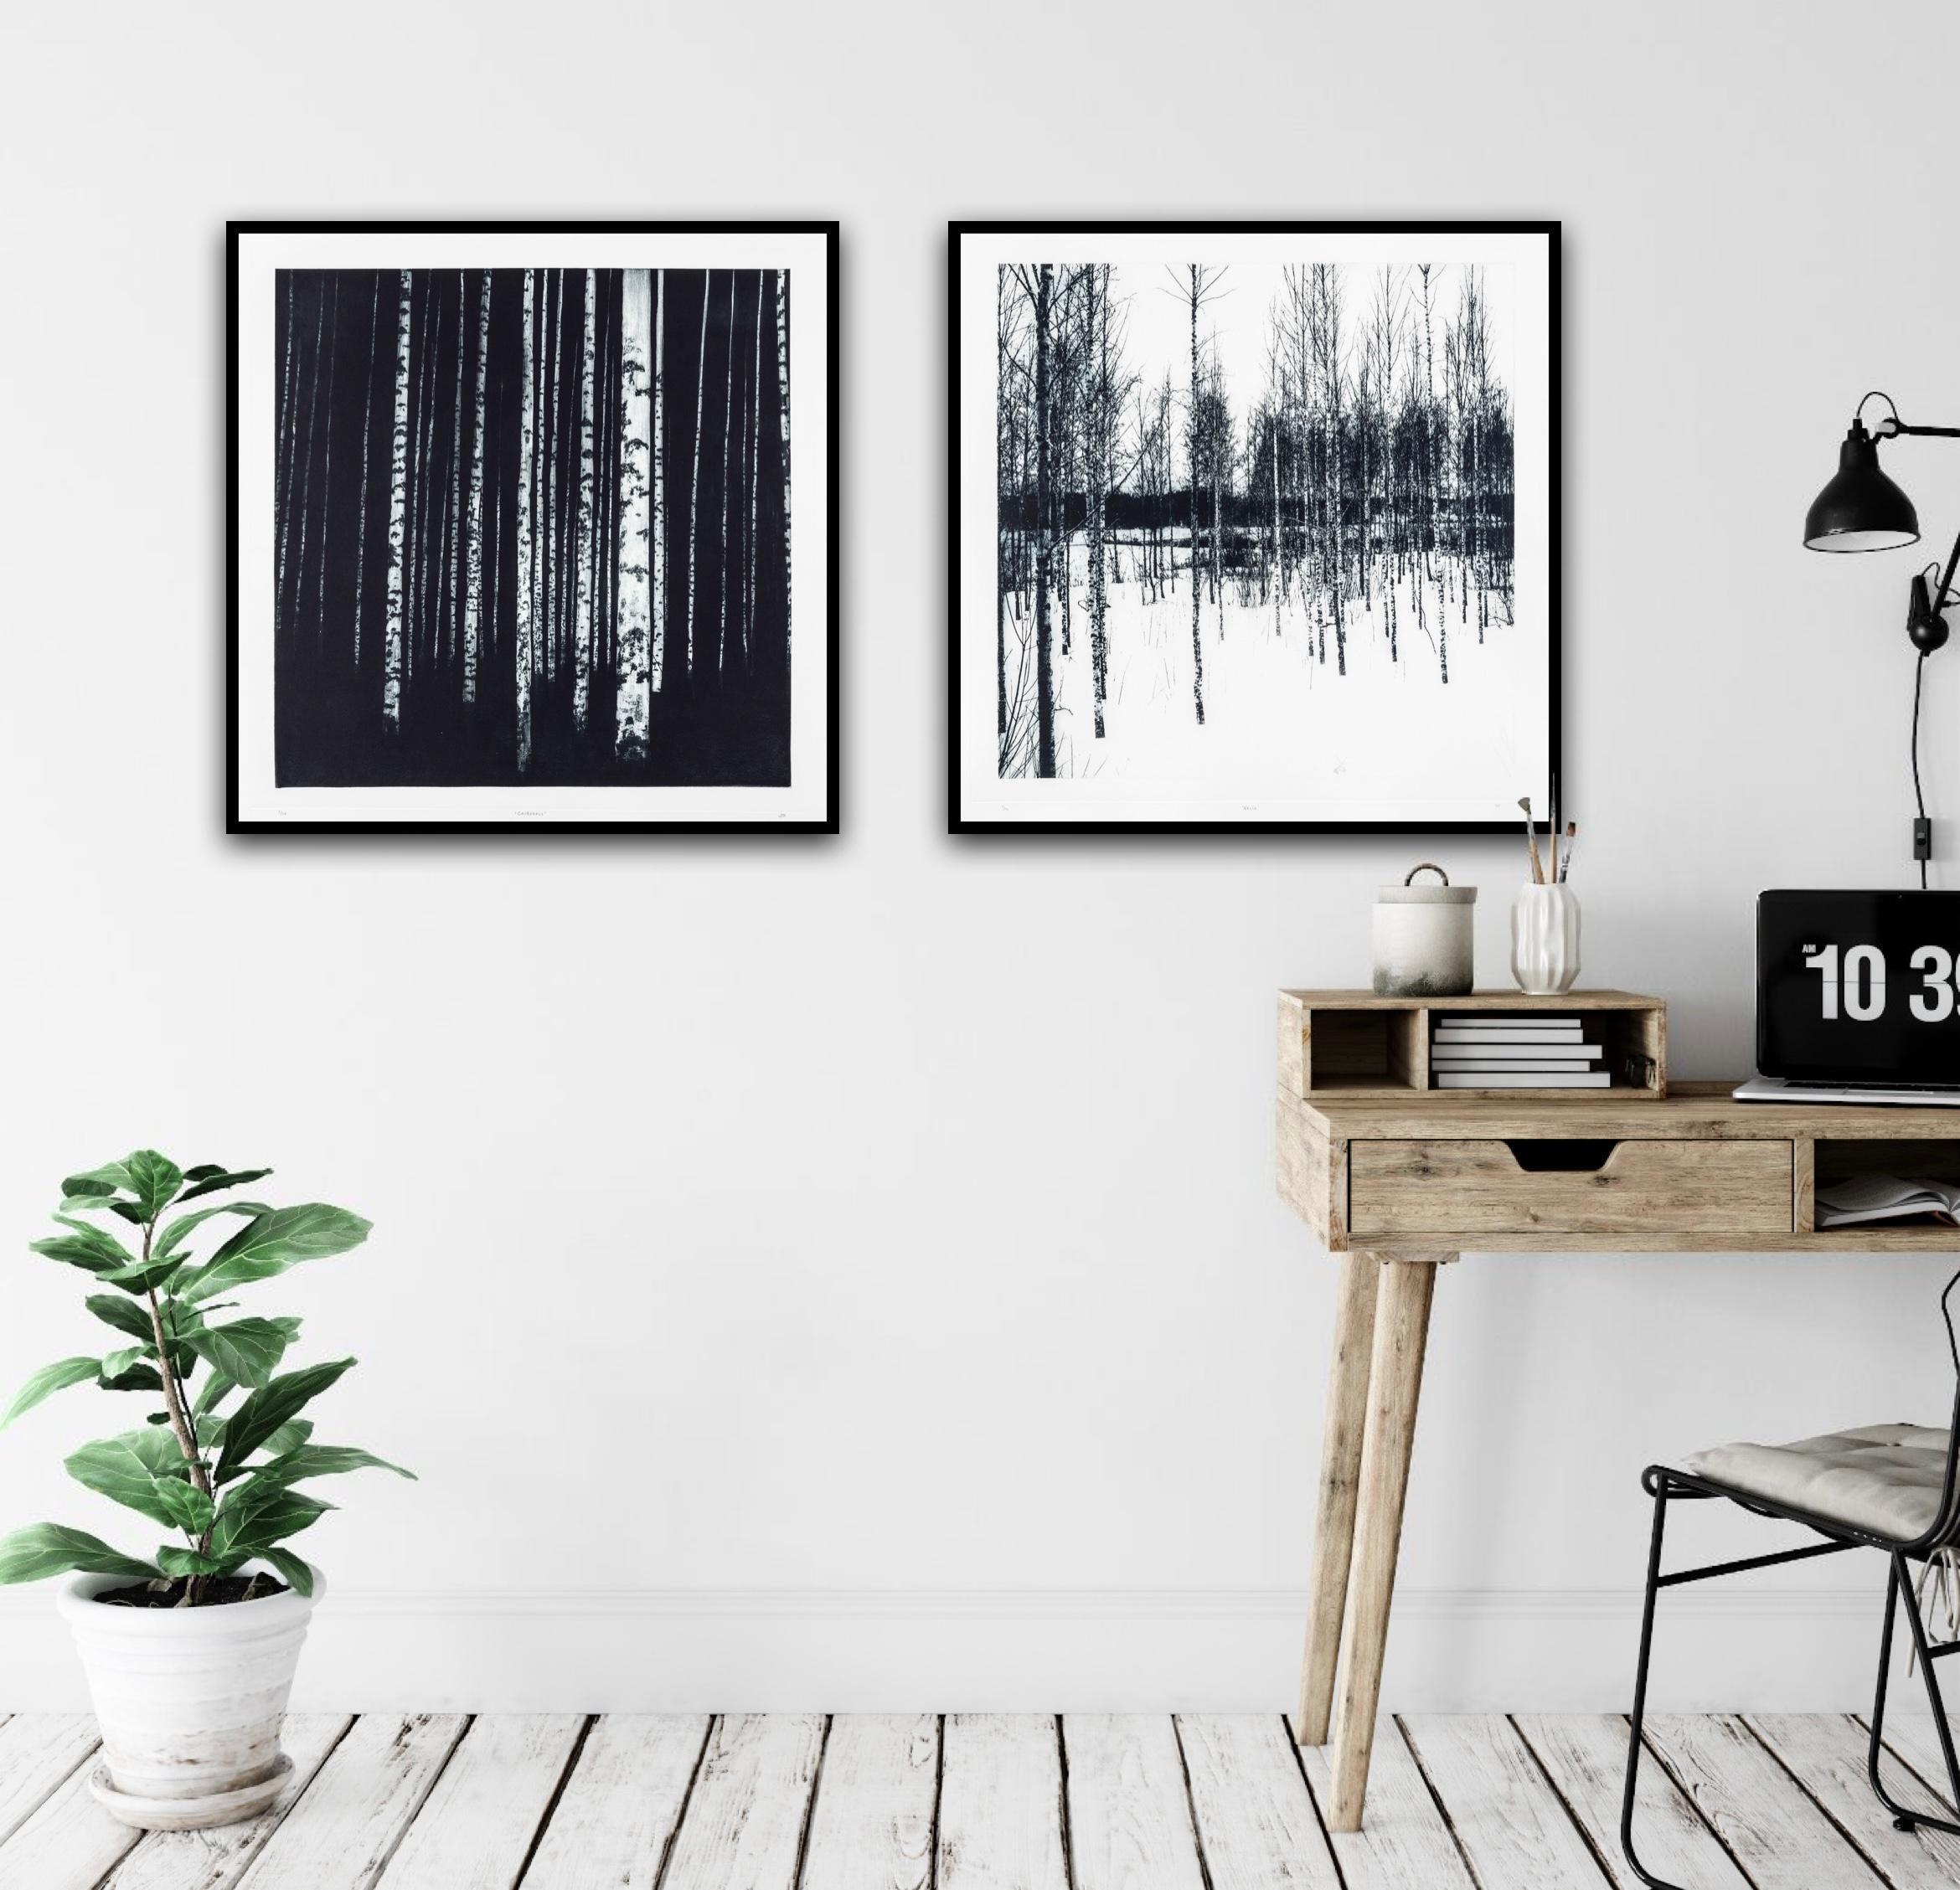 Carbonous and Neula diptych - Print by Sarah Duncan